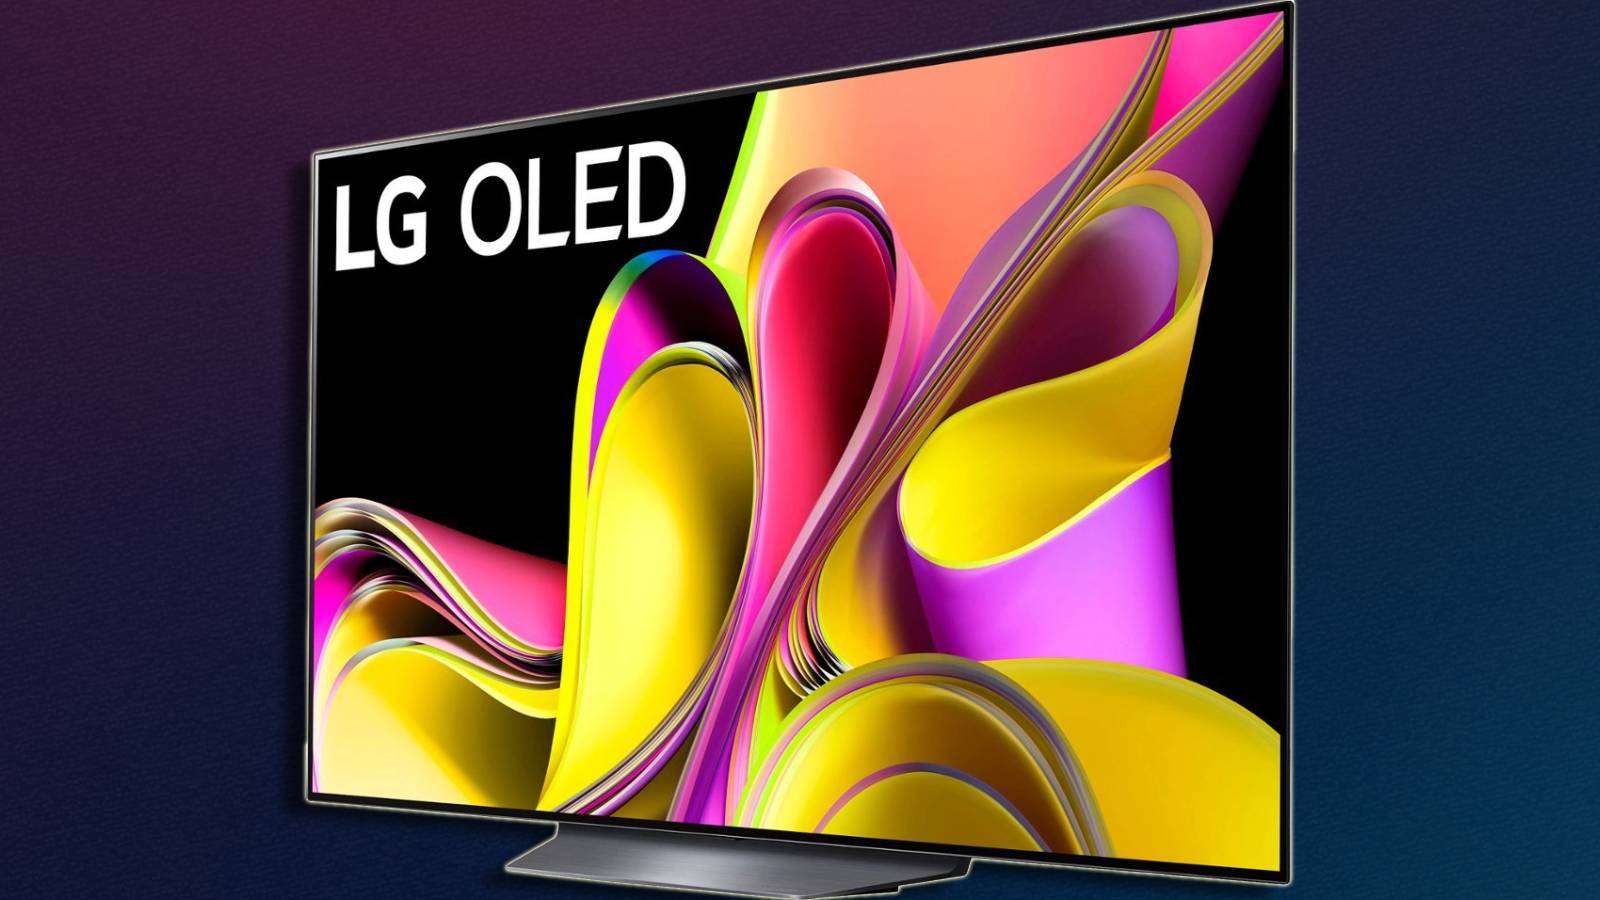 Massive LG OLED TV gets $1000 discount before the holidays - Dexerto